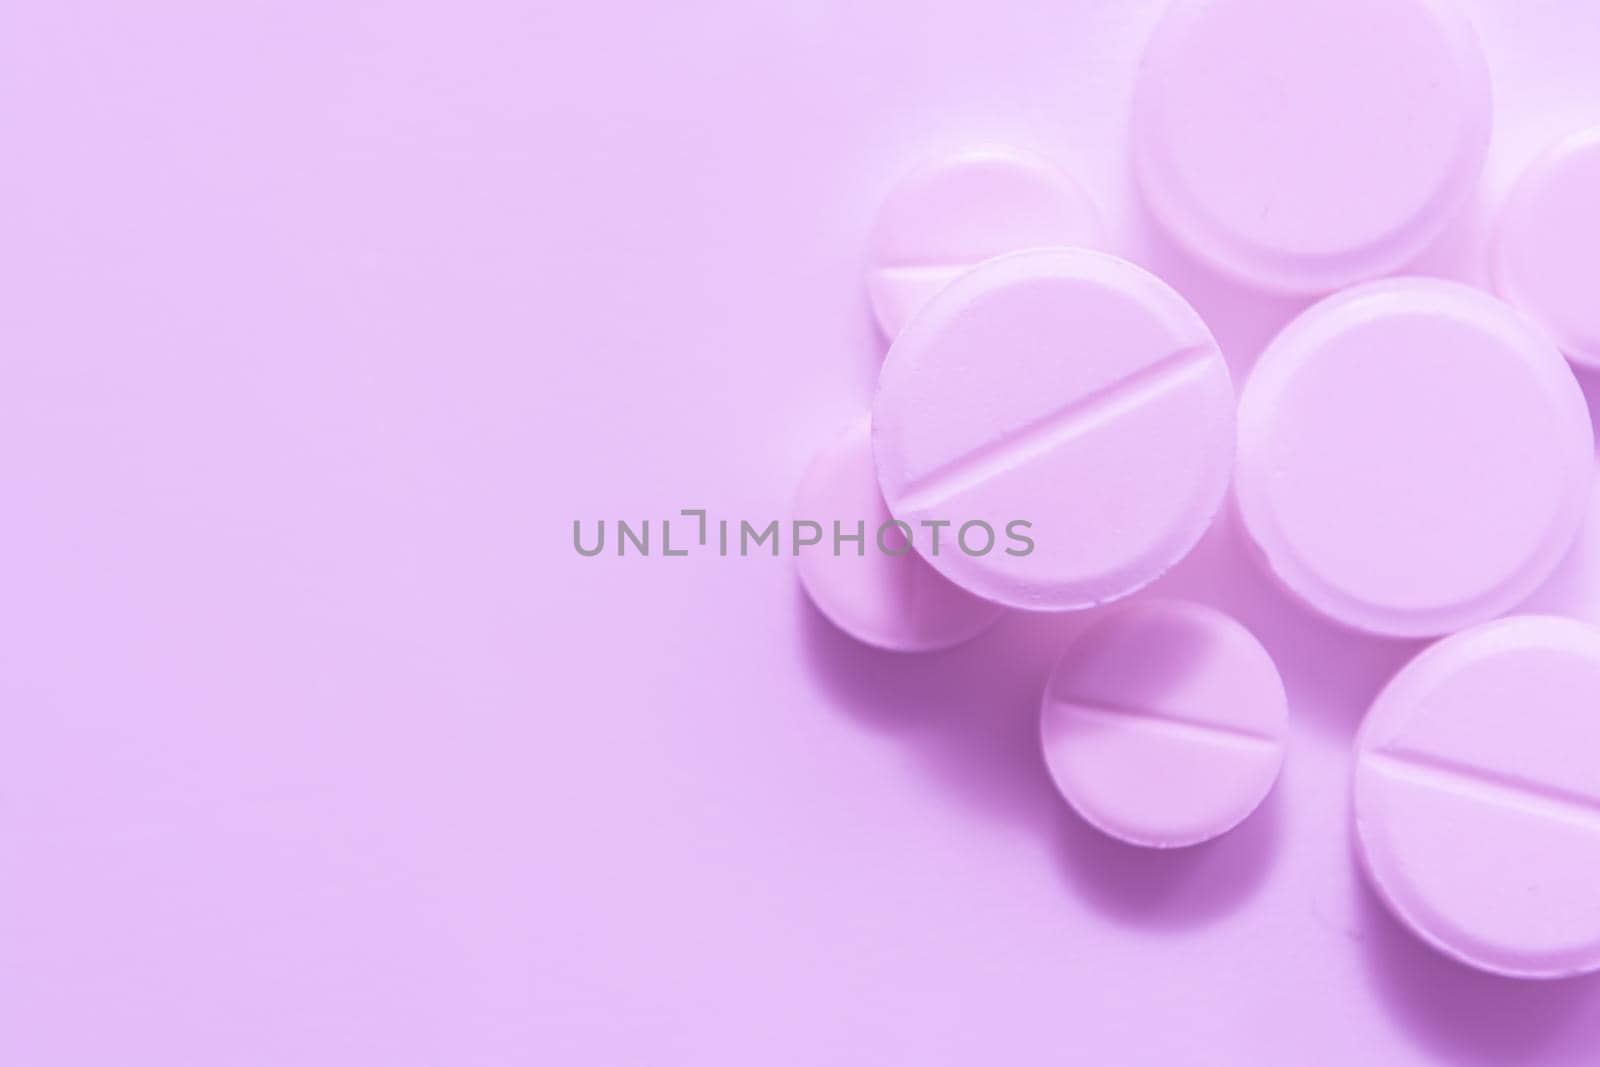 White-pink pills on a soft pink background. Selective focus.